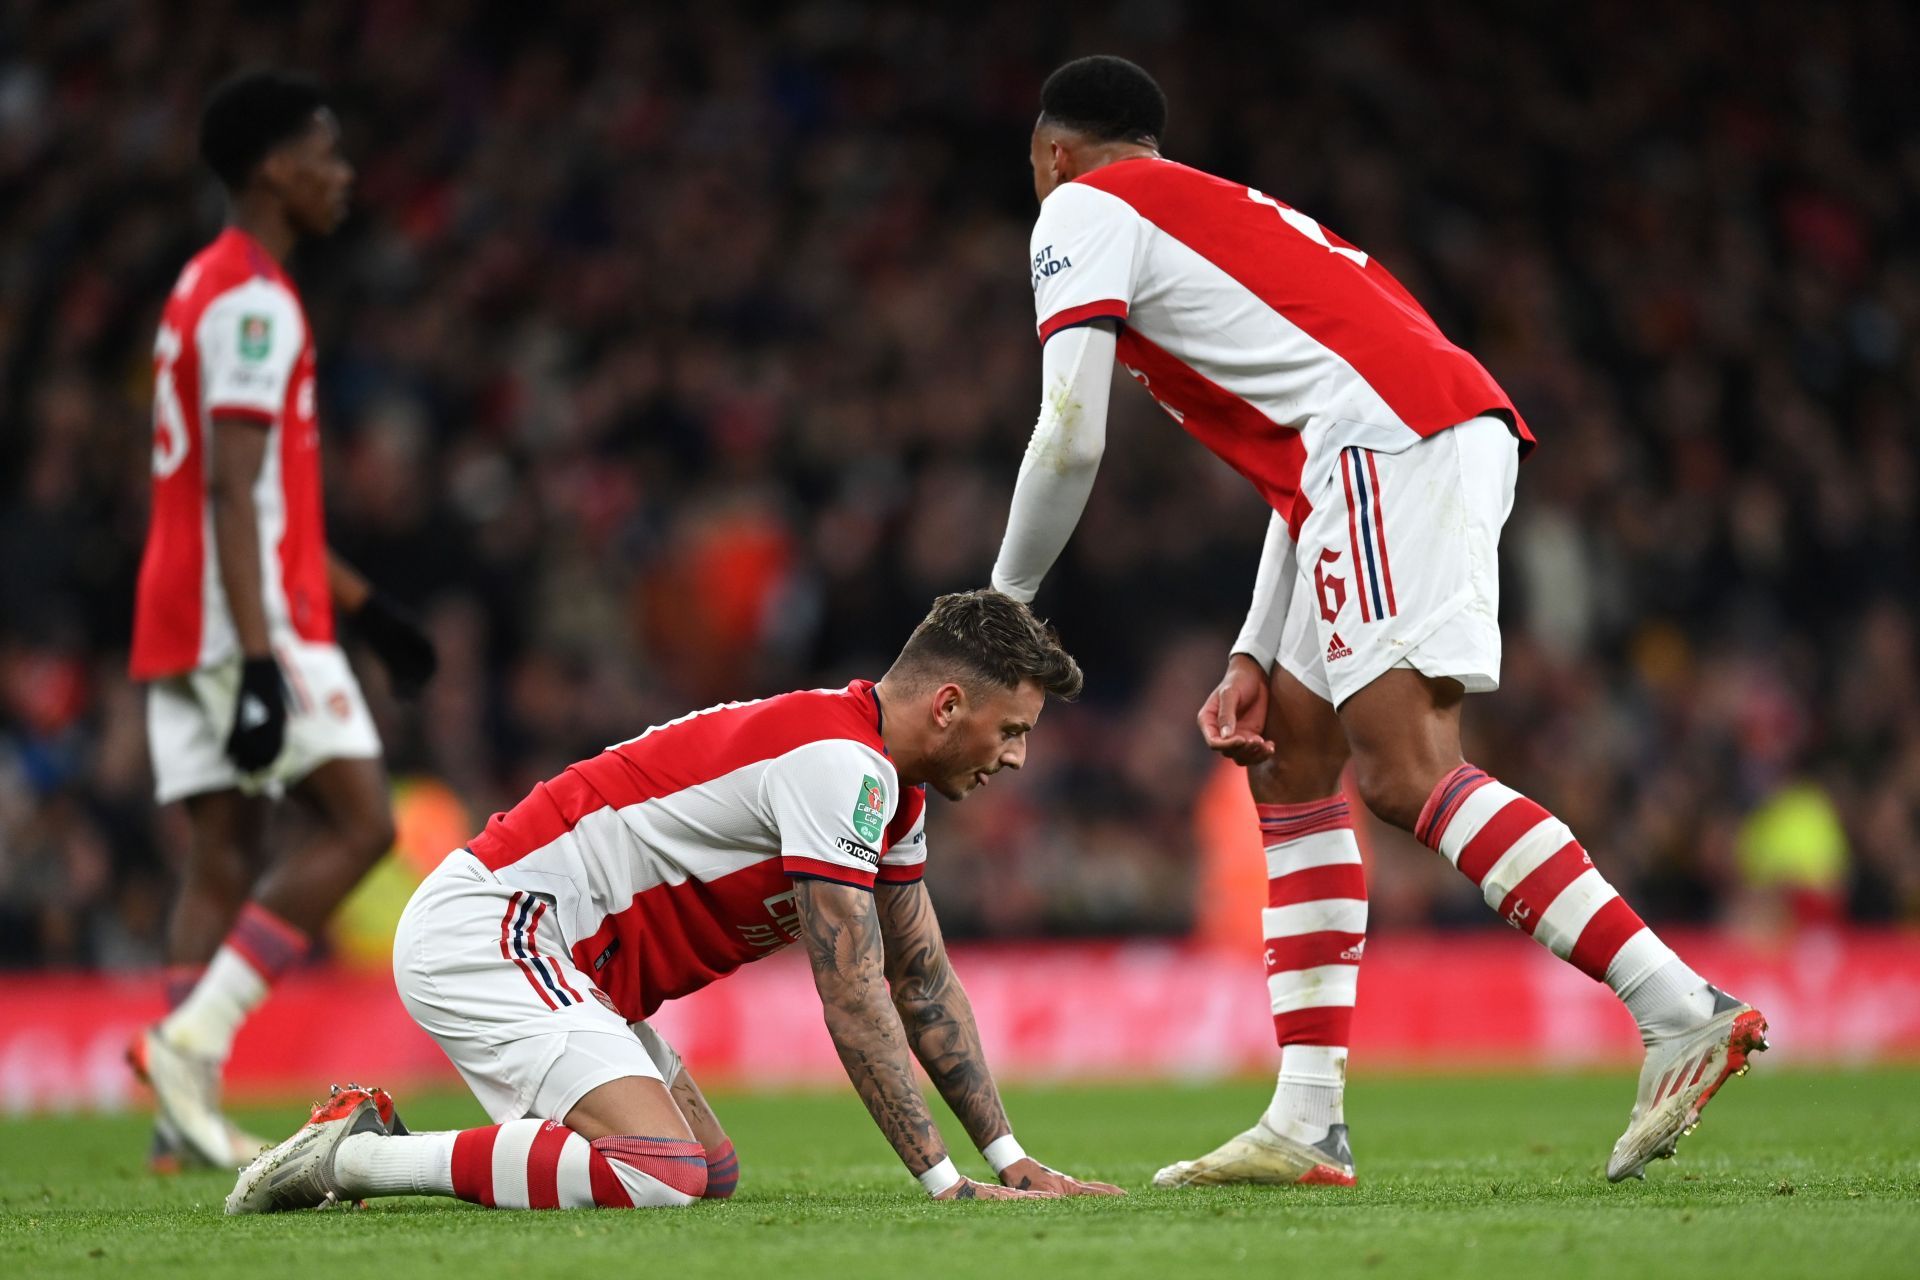 The Gunners are winless in their last four games across all fronts